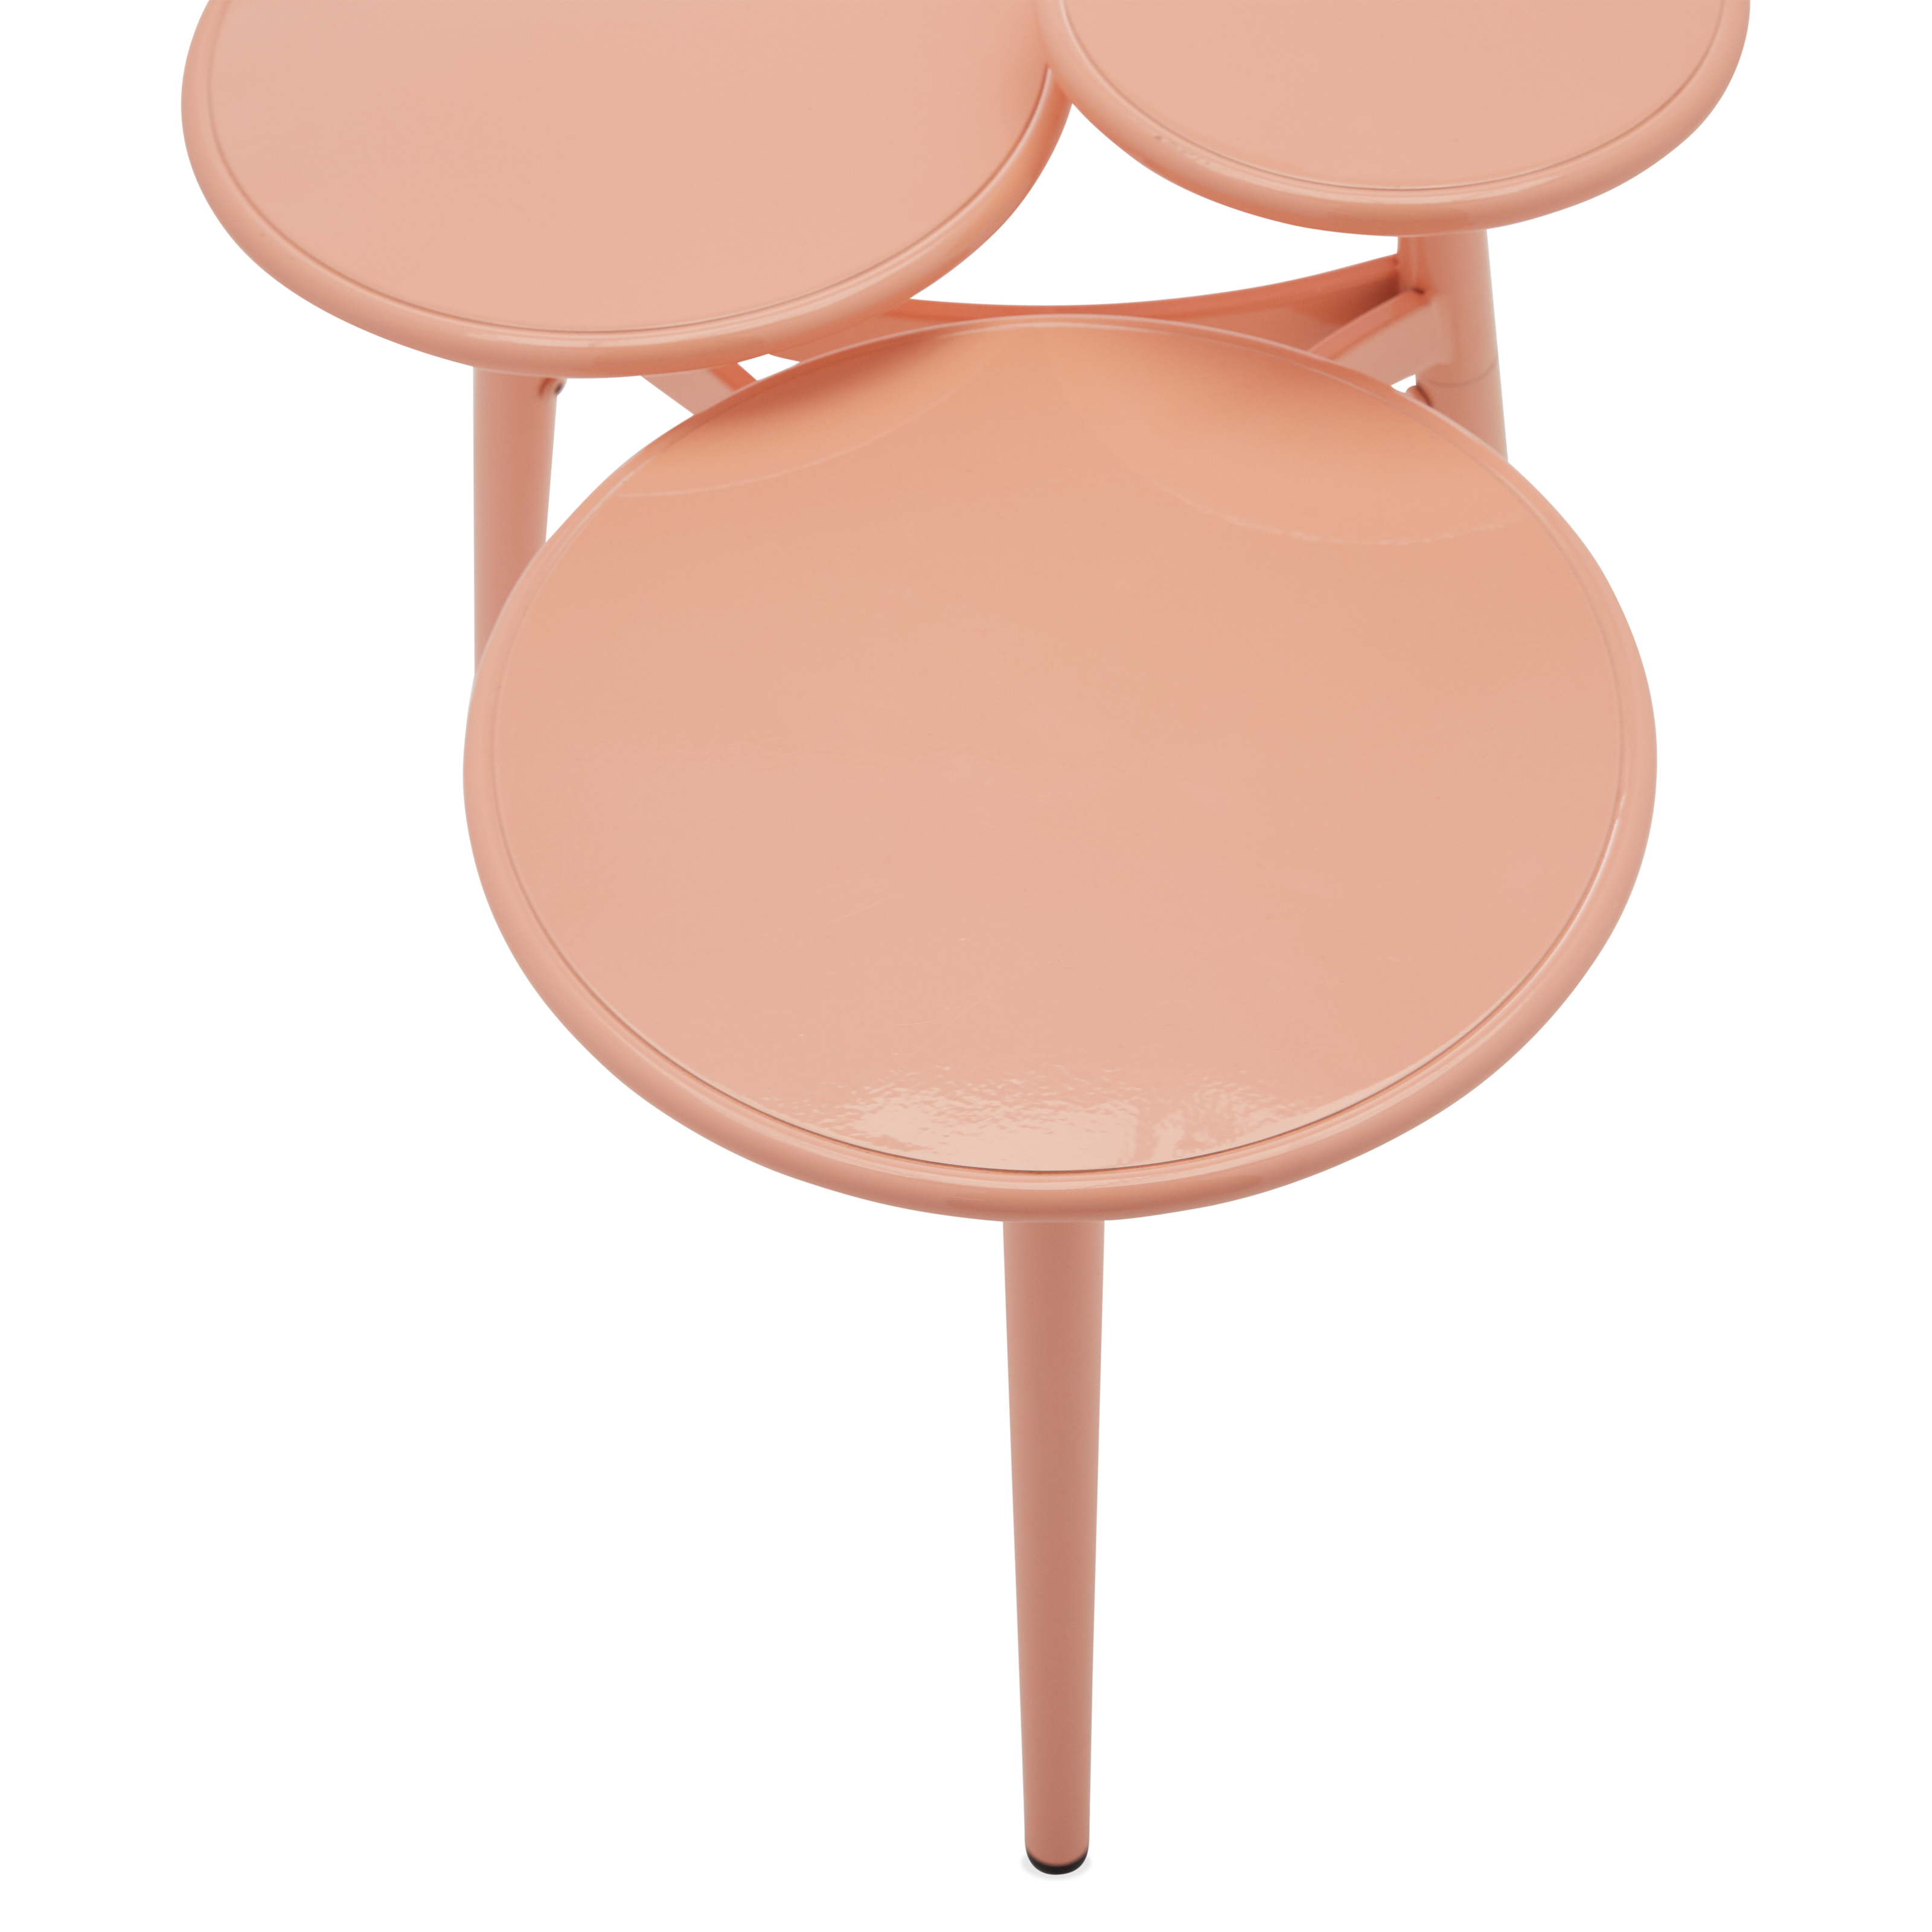 Multi-Tier Metal Accent Table, Multiple Colors by Drew Barrymore Flower Home - image 4 of 16